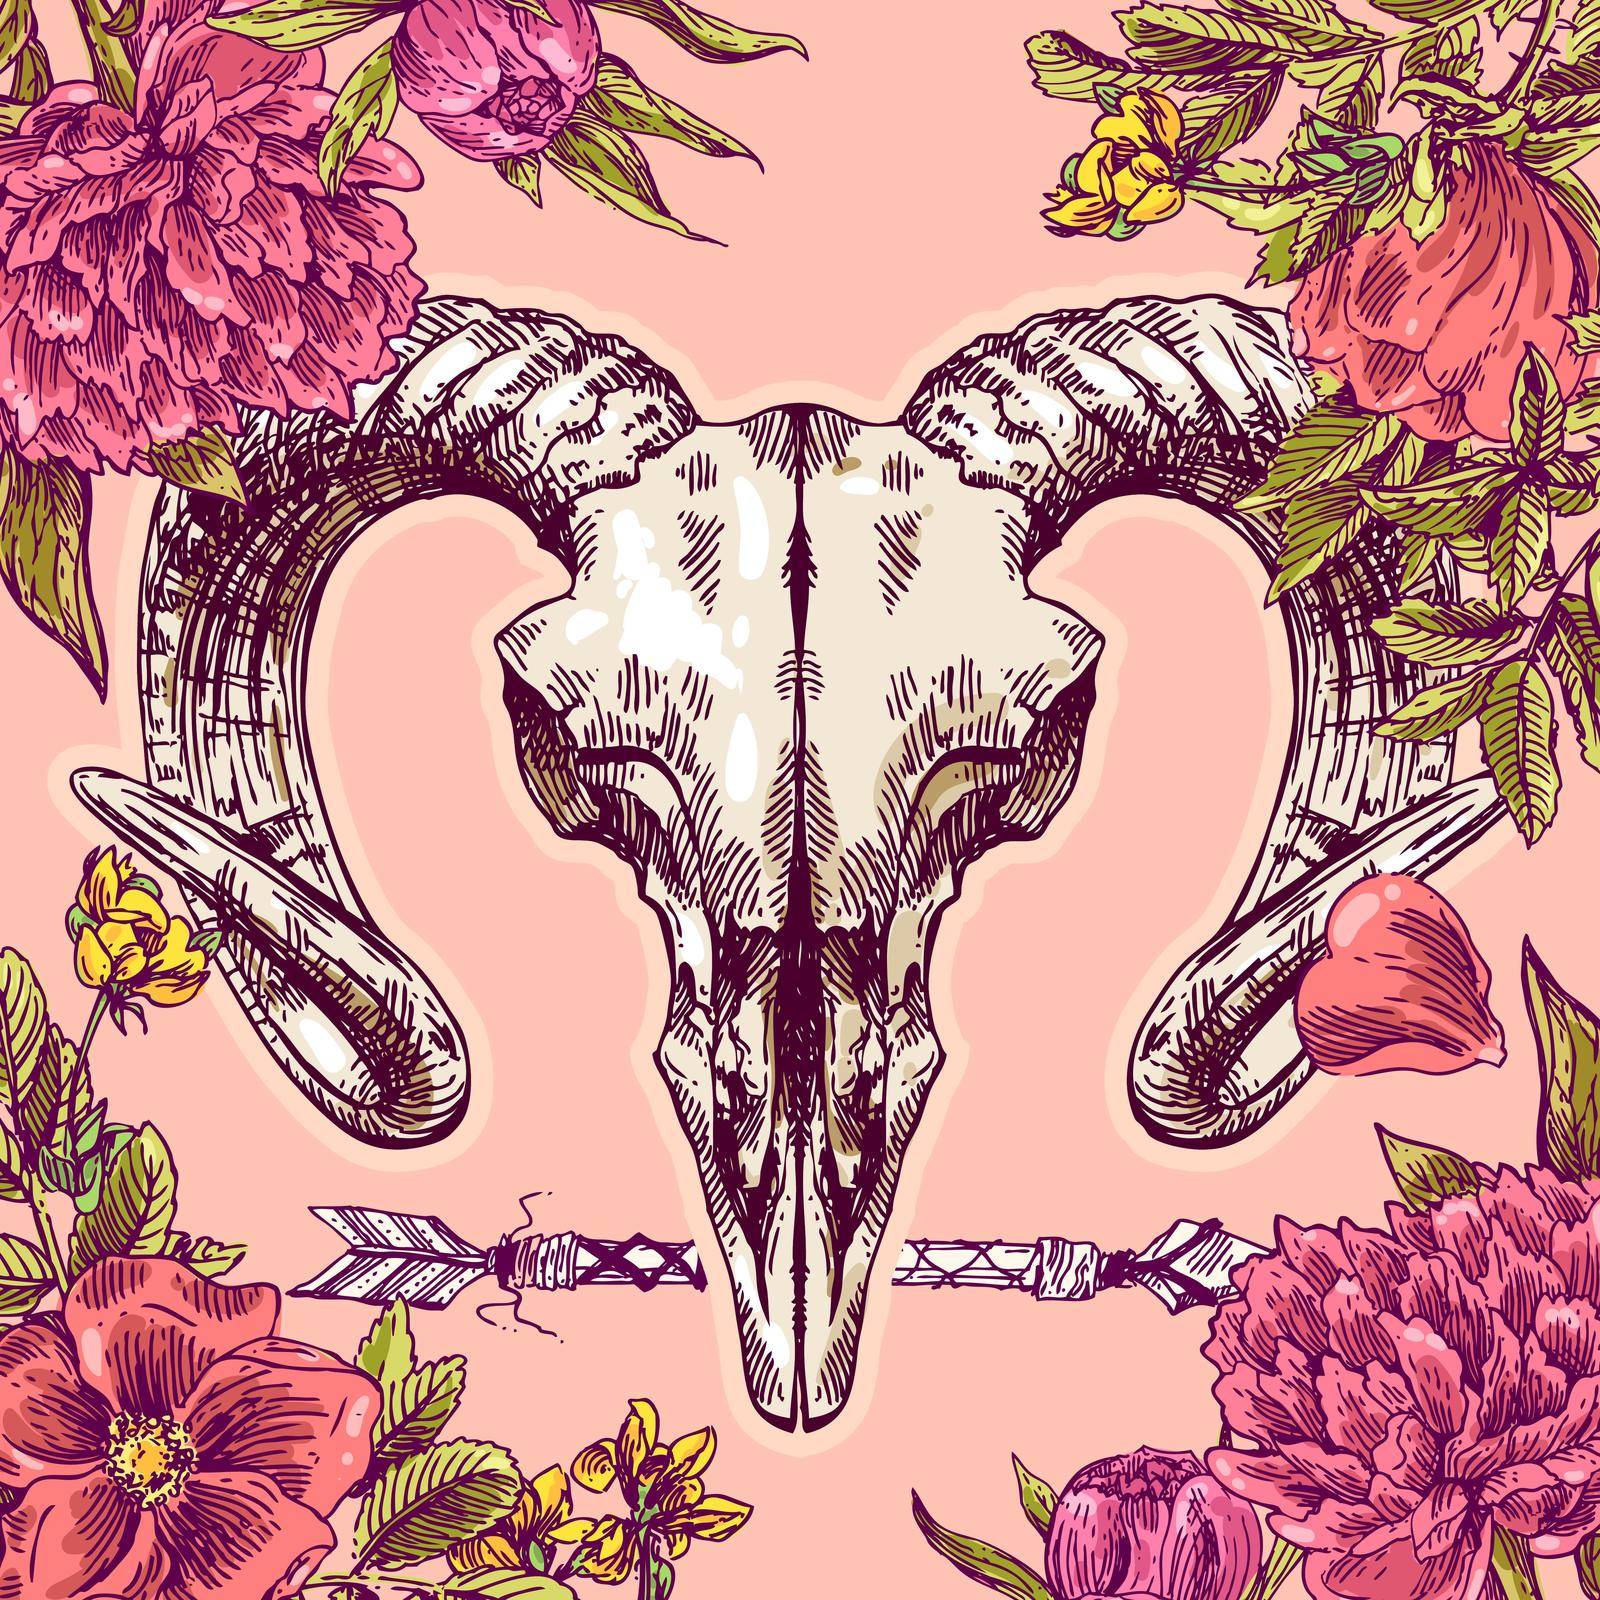 Vector sketch illustration animal skull. Drawing by hand. Boho style. Use for posters, postcards, print for t-shirt, tattoo.